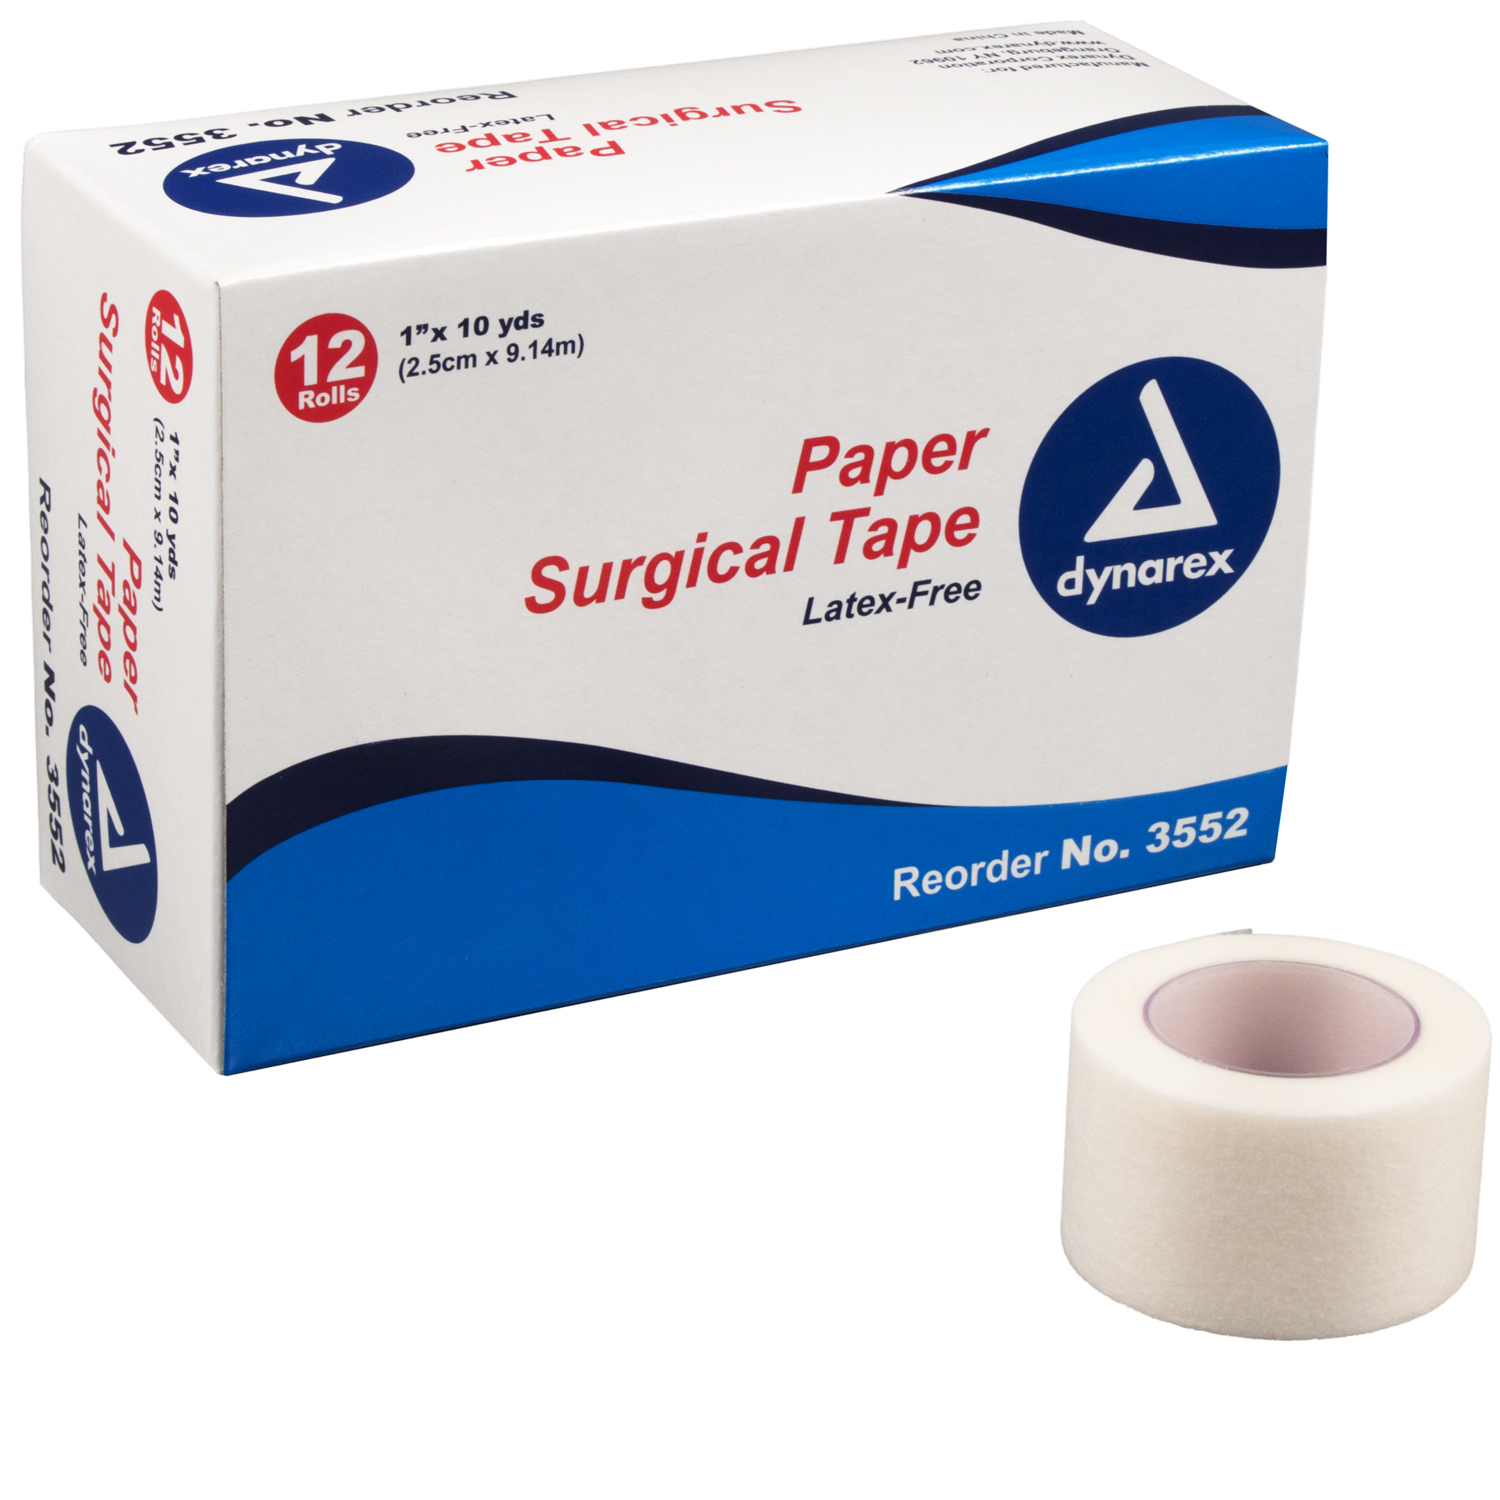 1 Inch Paper Tape: Box of 12